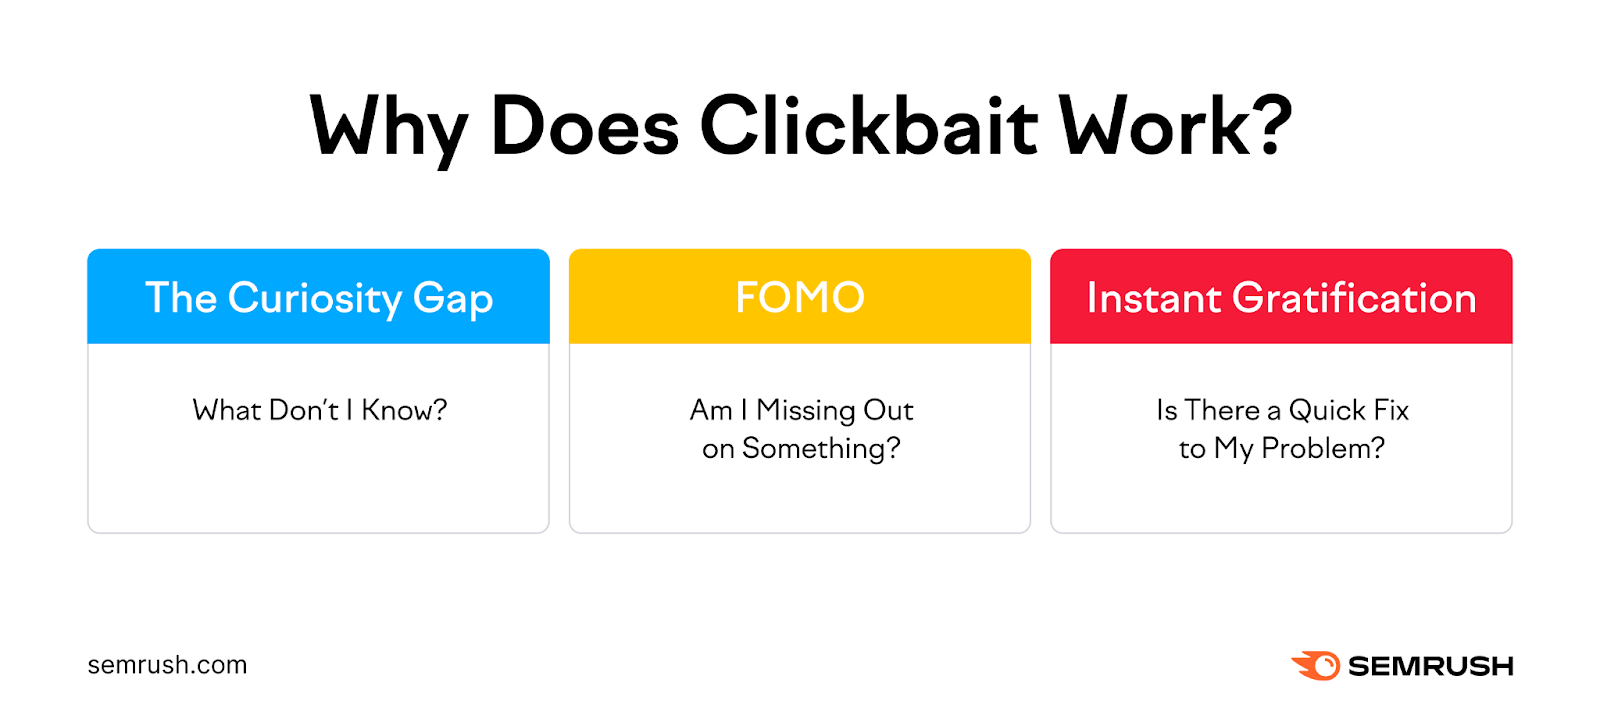 An infographic showing three psychological triggers that explain why clickbait works